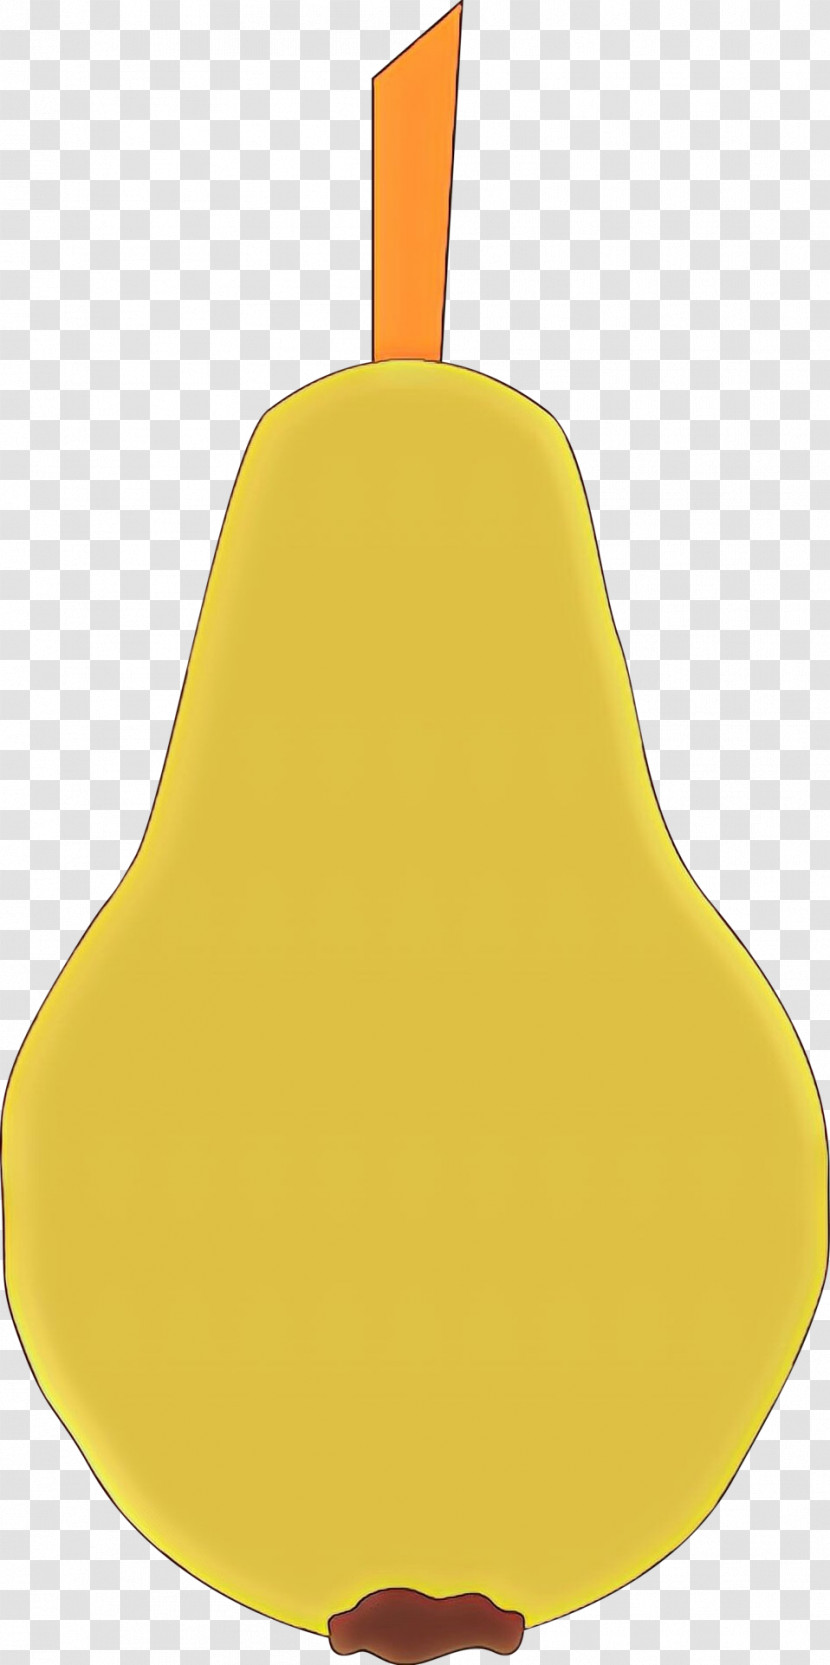 Yellow Pear Pear Tree Fruit Transparent PNG